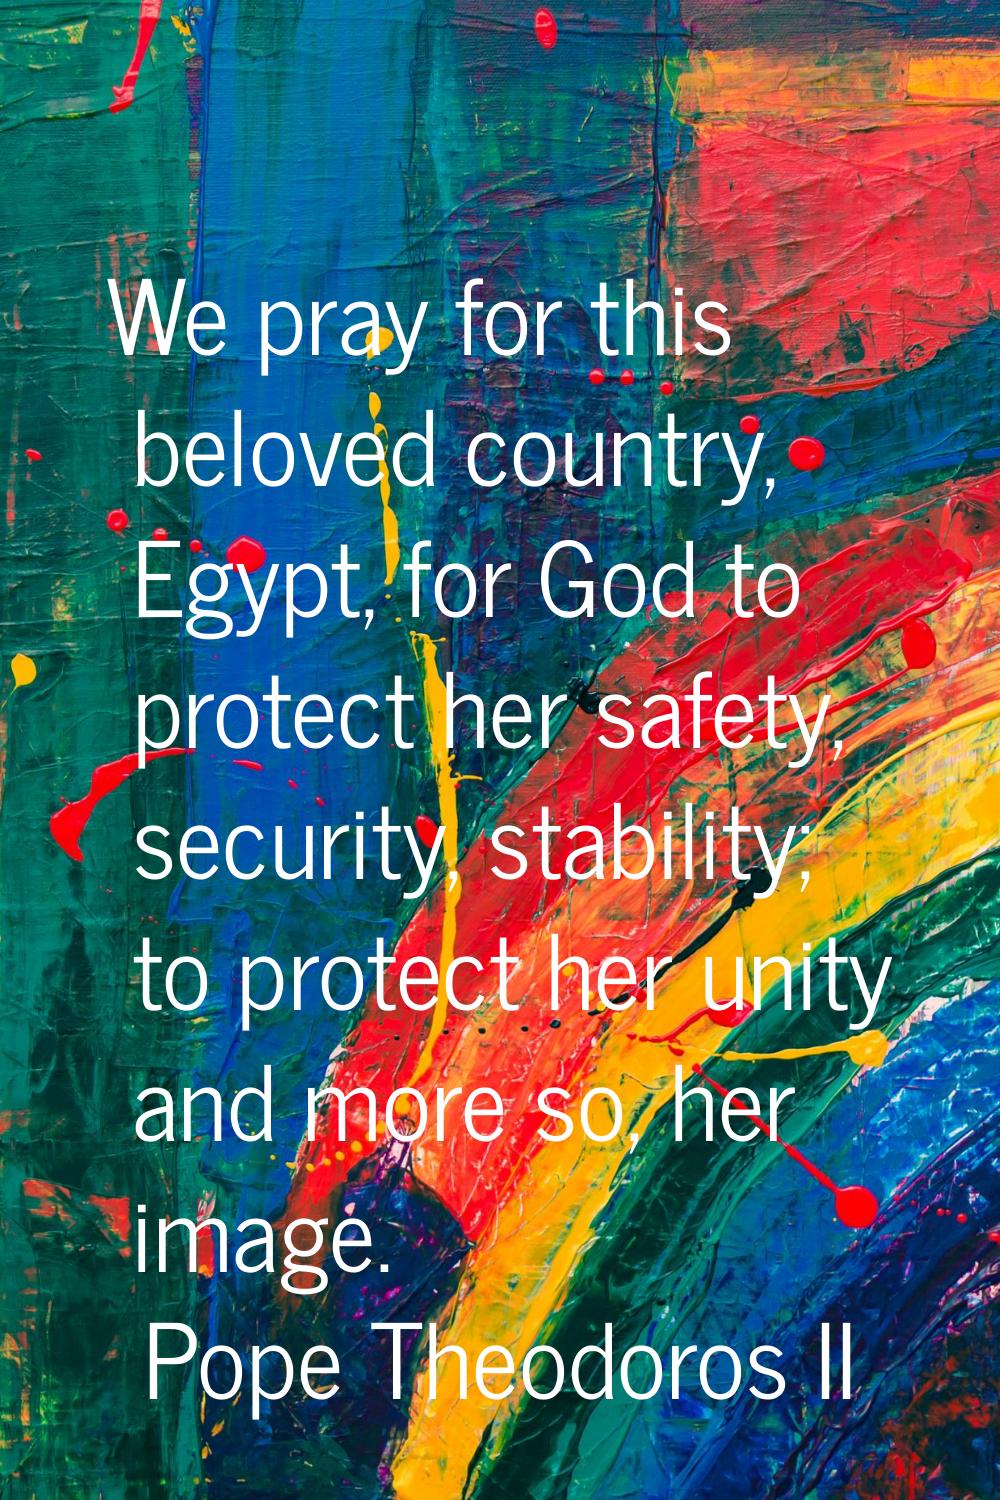 We pray for this beloved country, Egypt, for God to protect her safety, security, stability; to pro